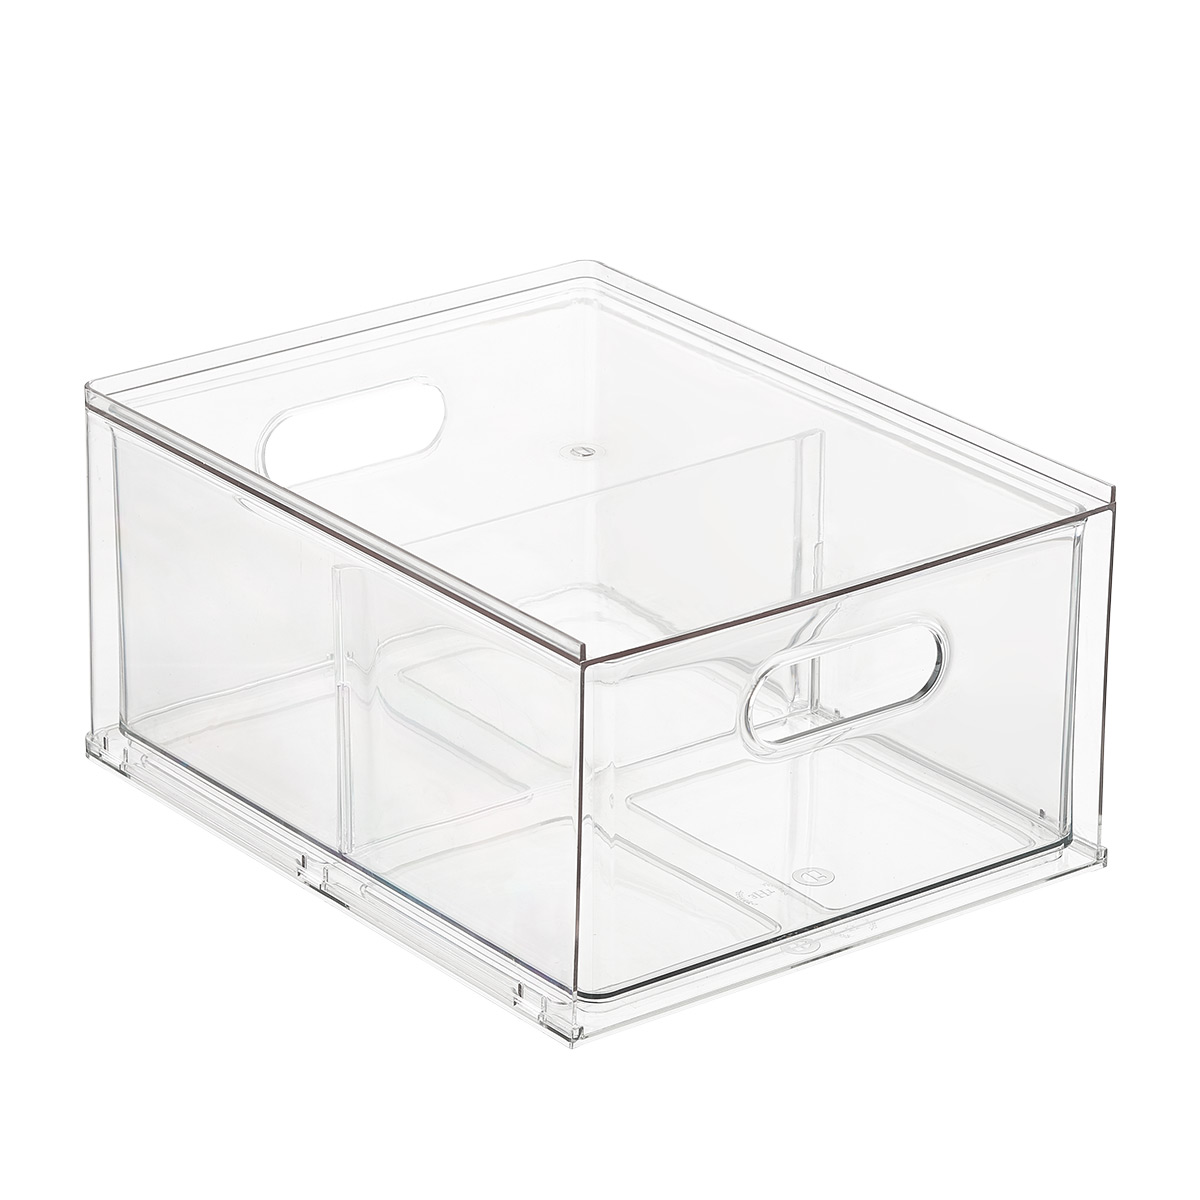 https://images.containerstore.com/catalogimages?sku=10077088